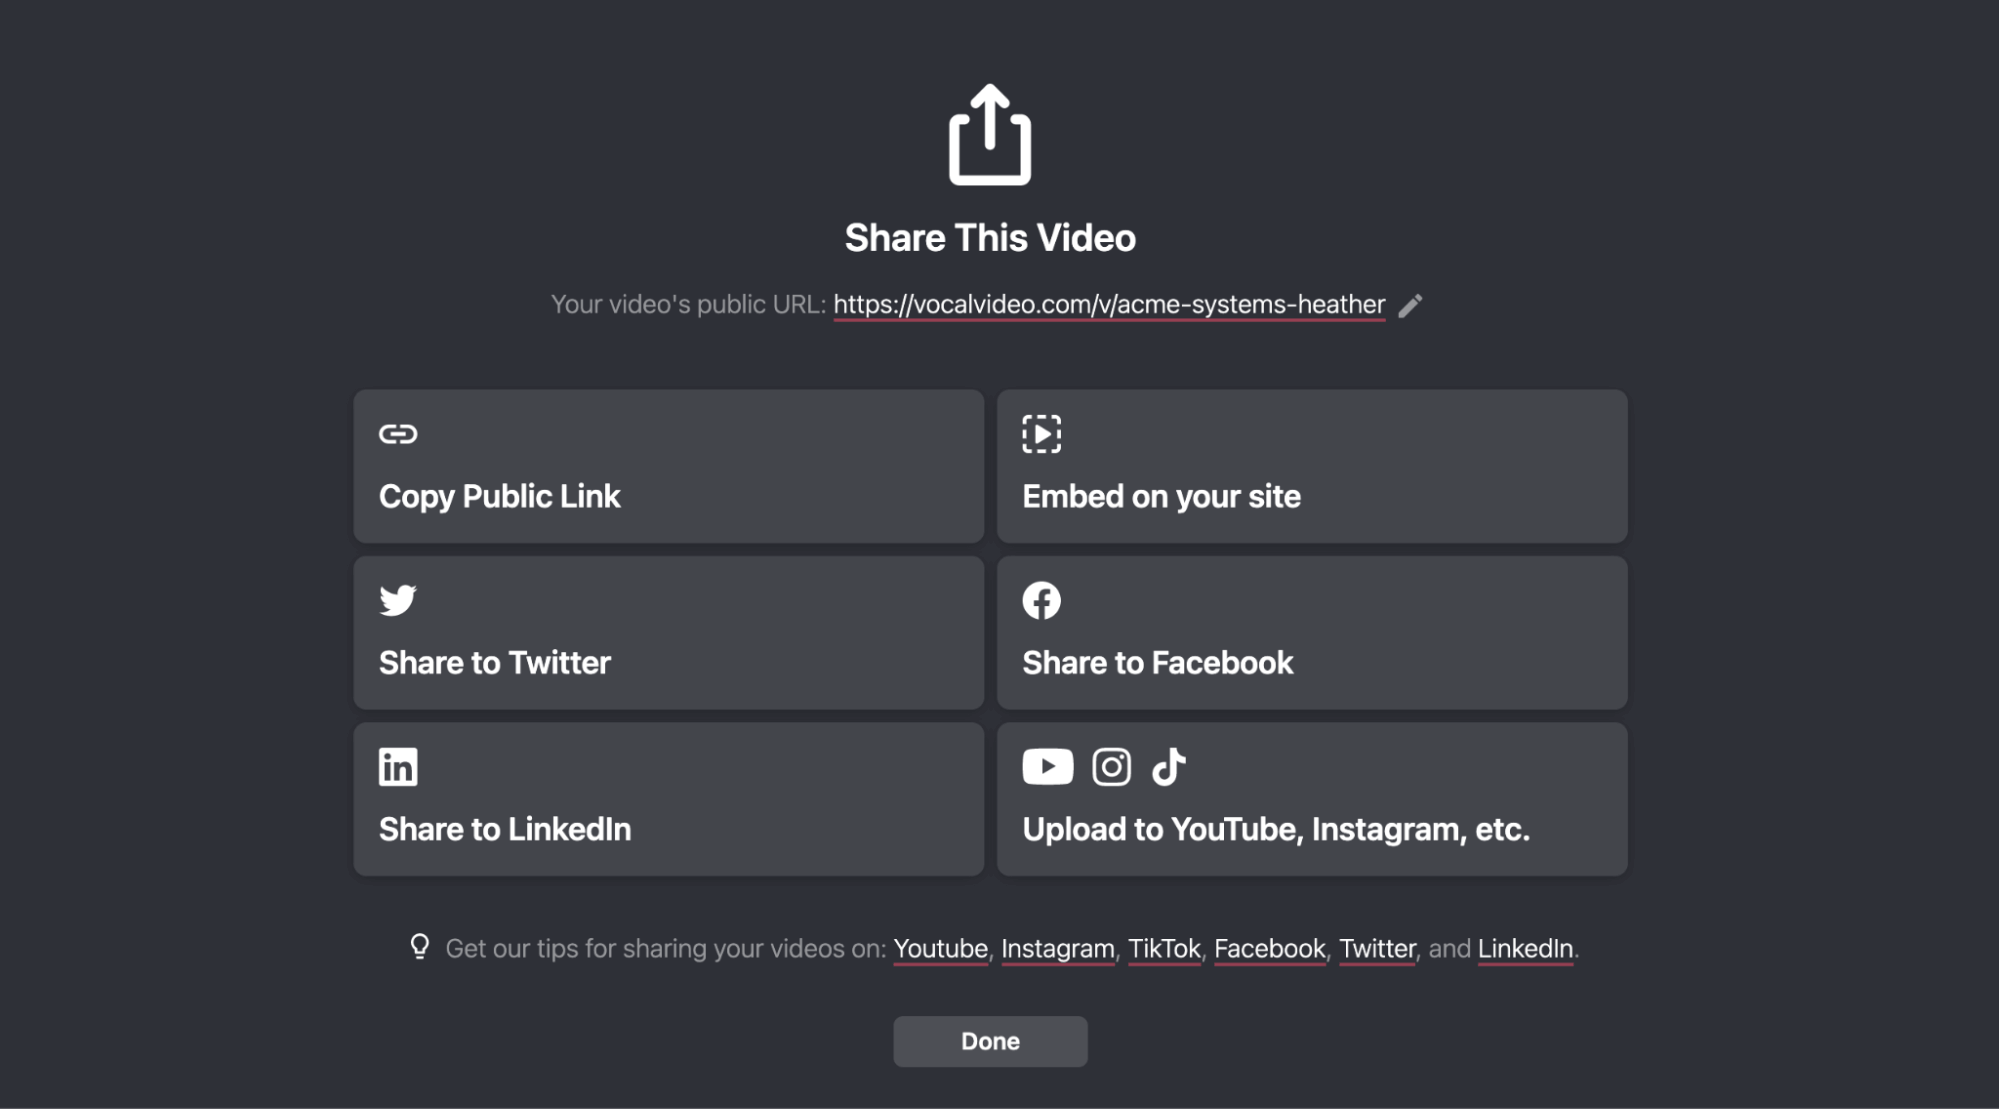 Share This Video: Copy Public Link, Embed on your site, Share to Twitter/Facebook/LinkedIn, Upload to YouTube, Instagram, etc.